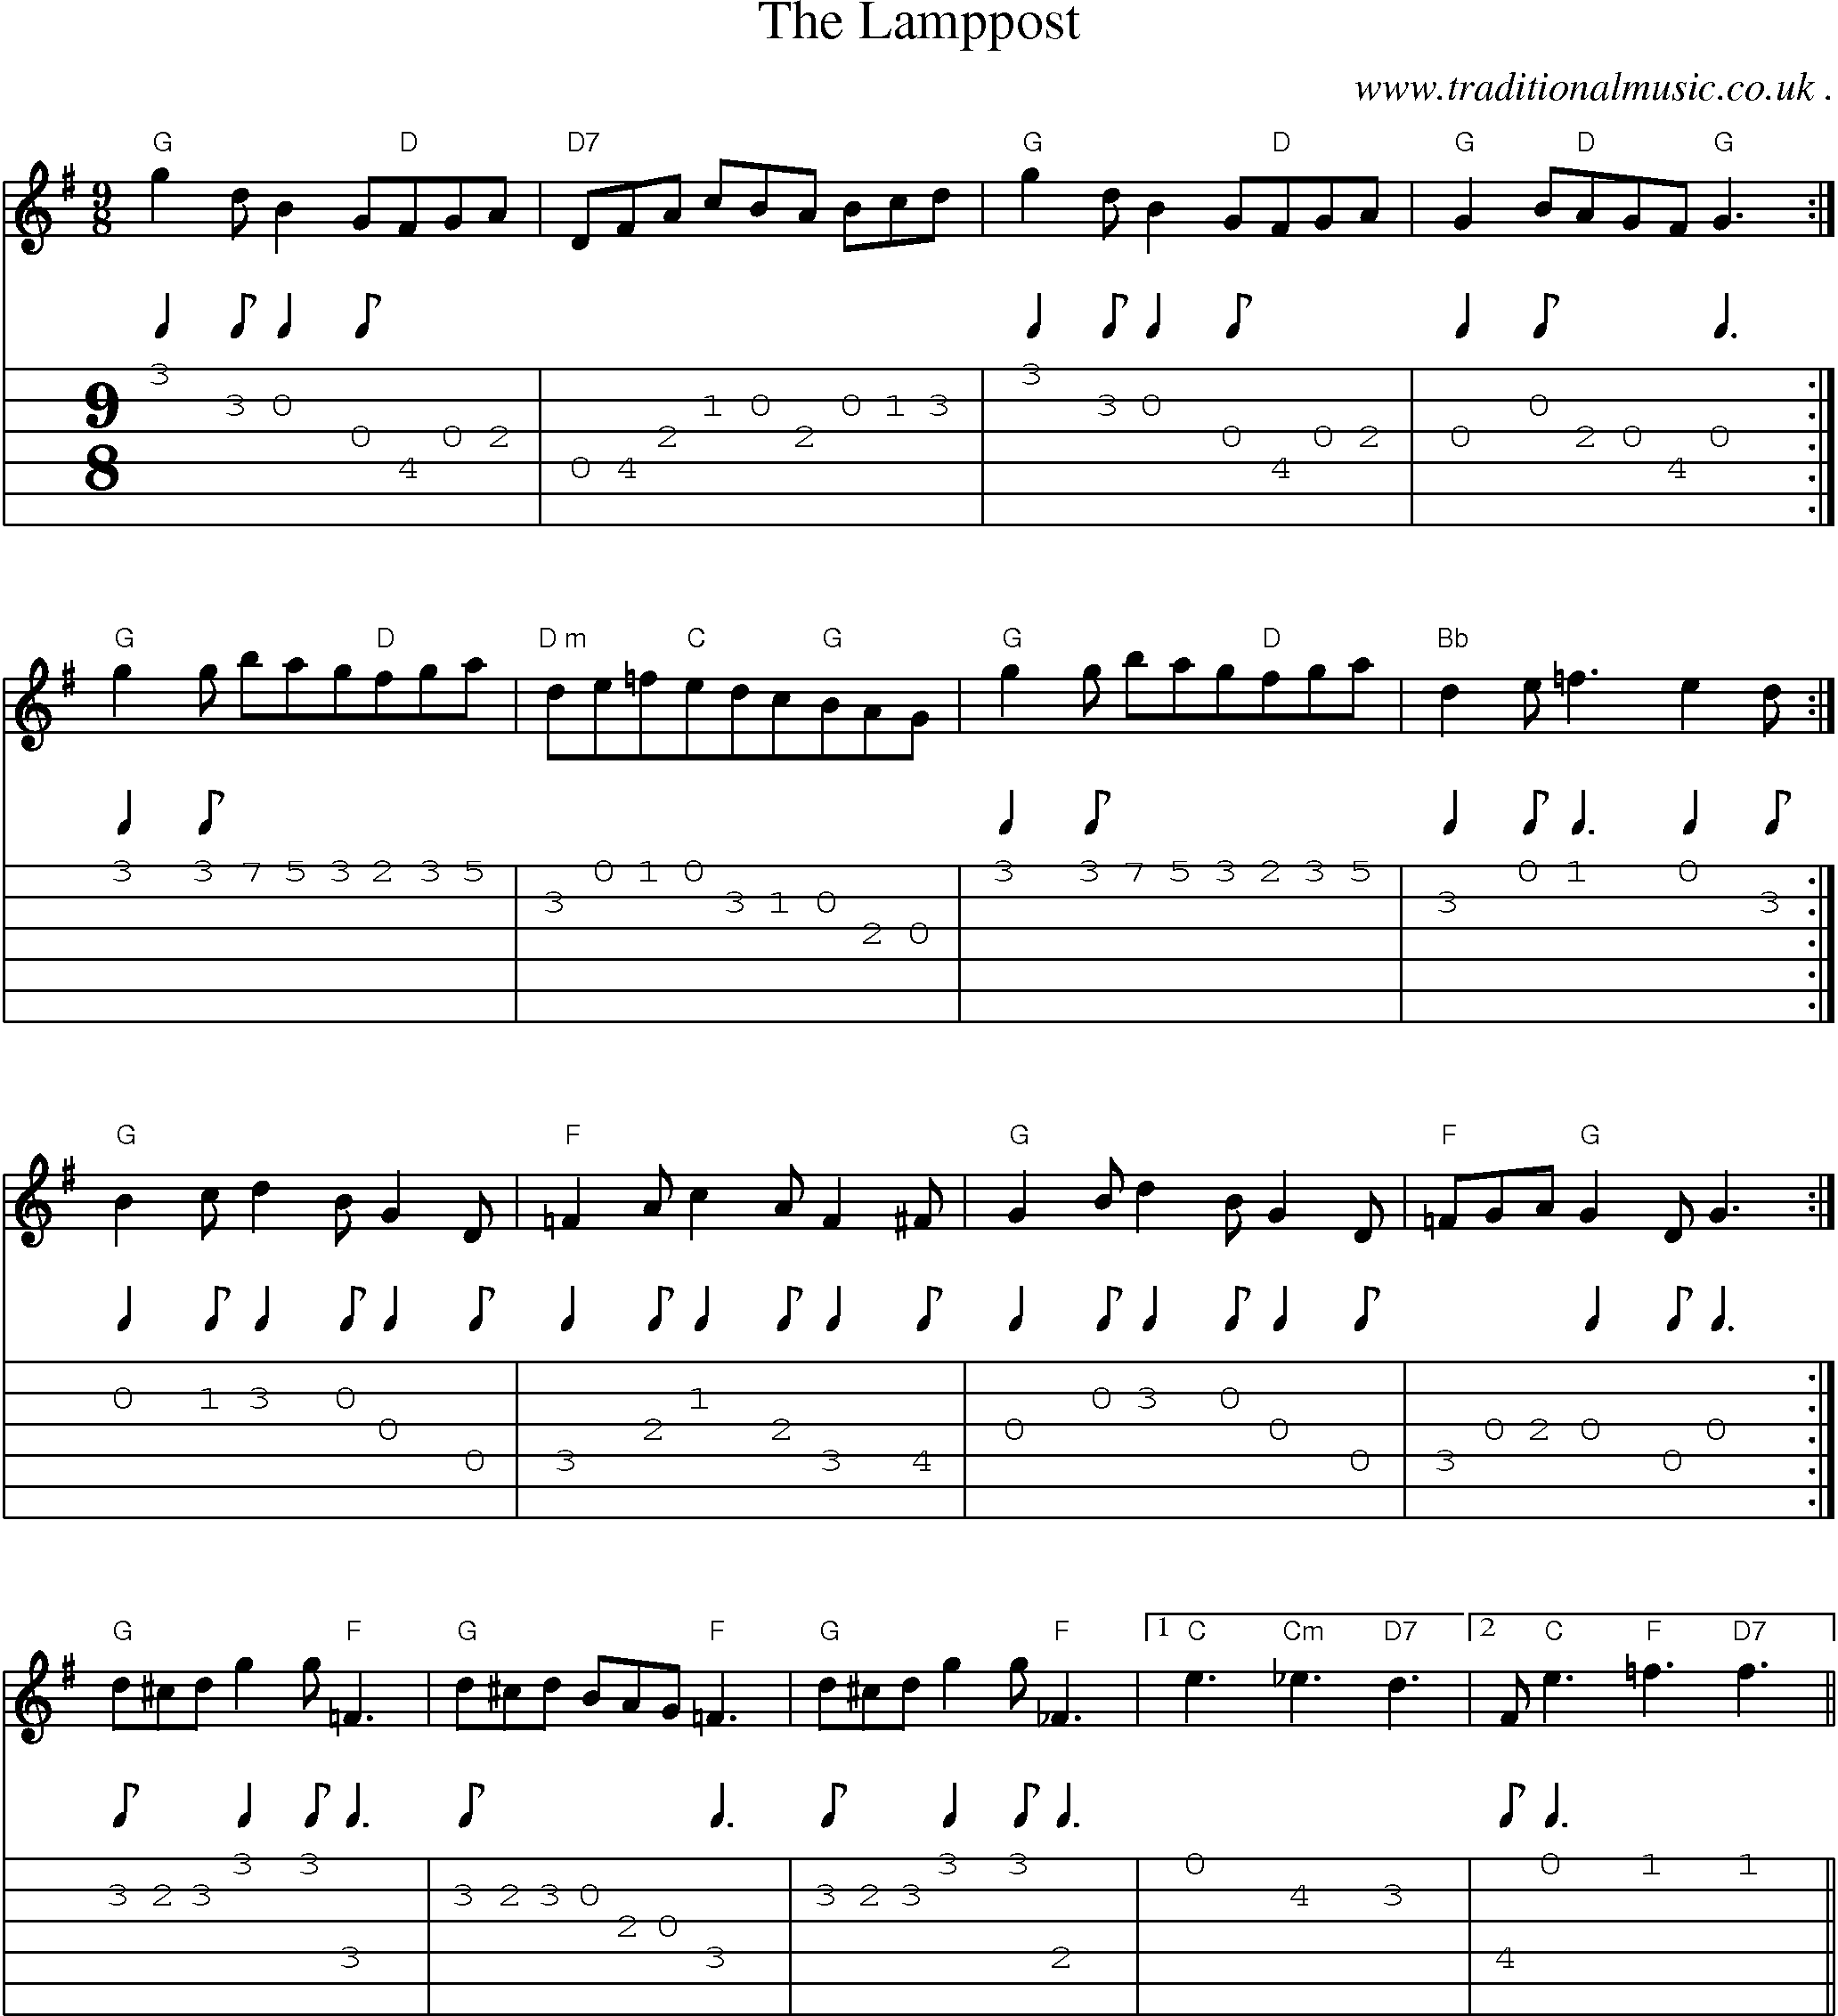 Sheet-Music and Guitar Tabs for The Lamppost